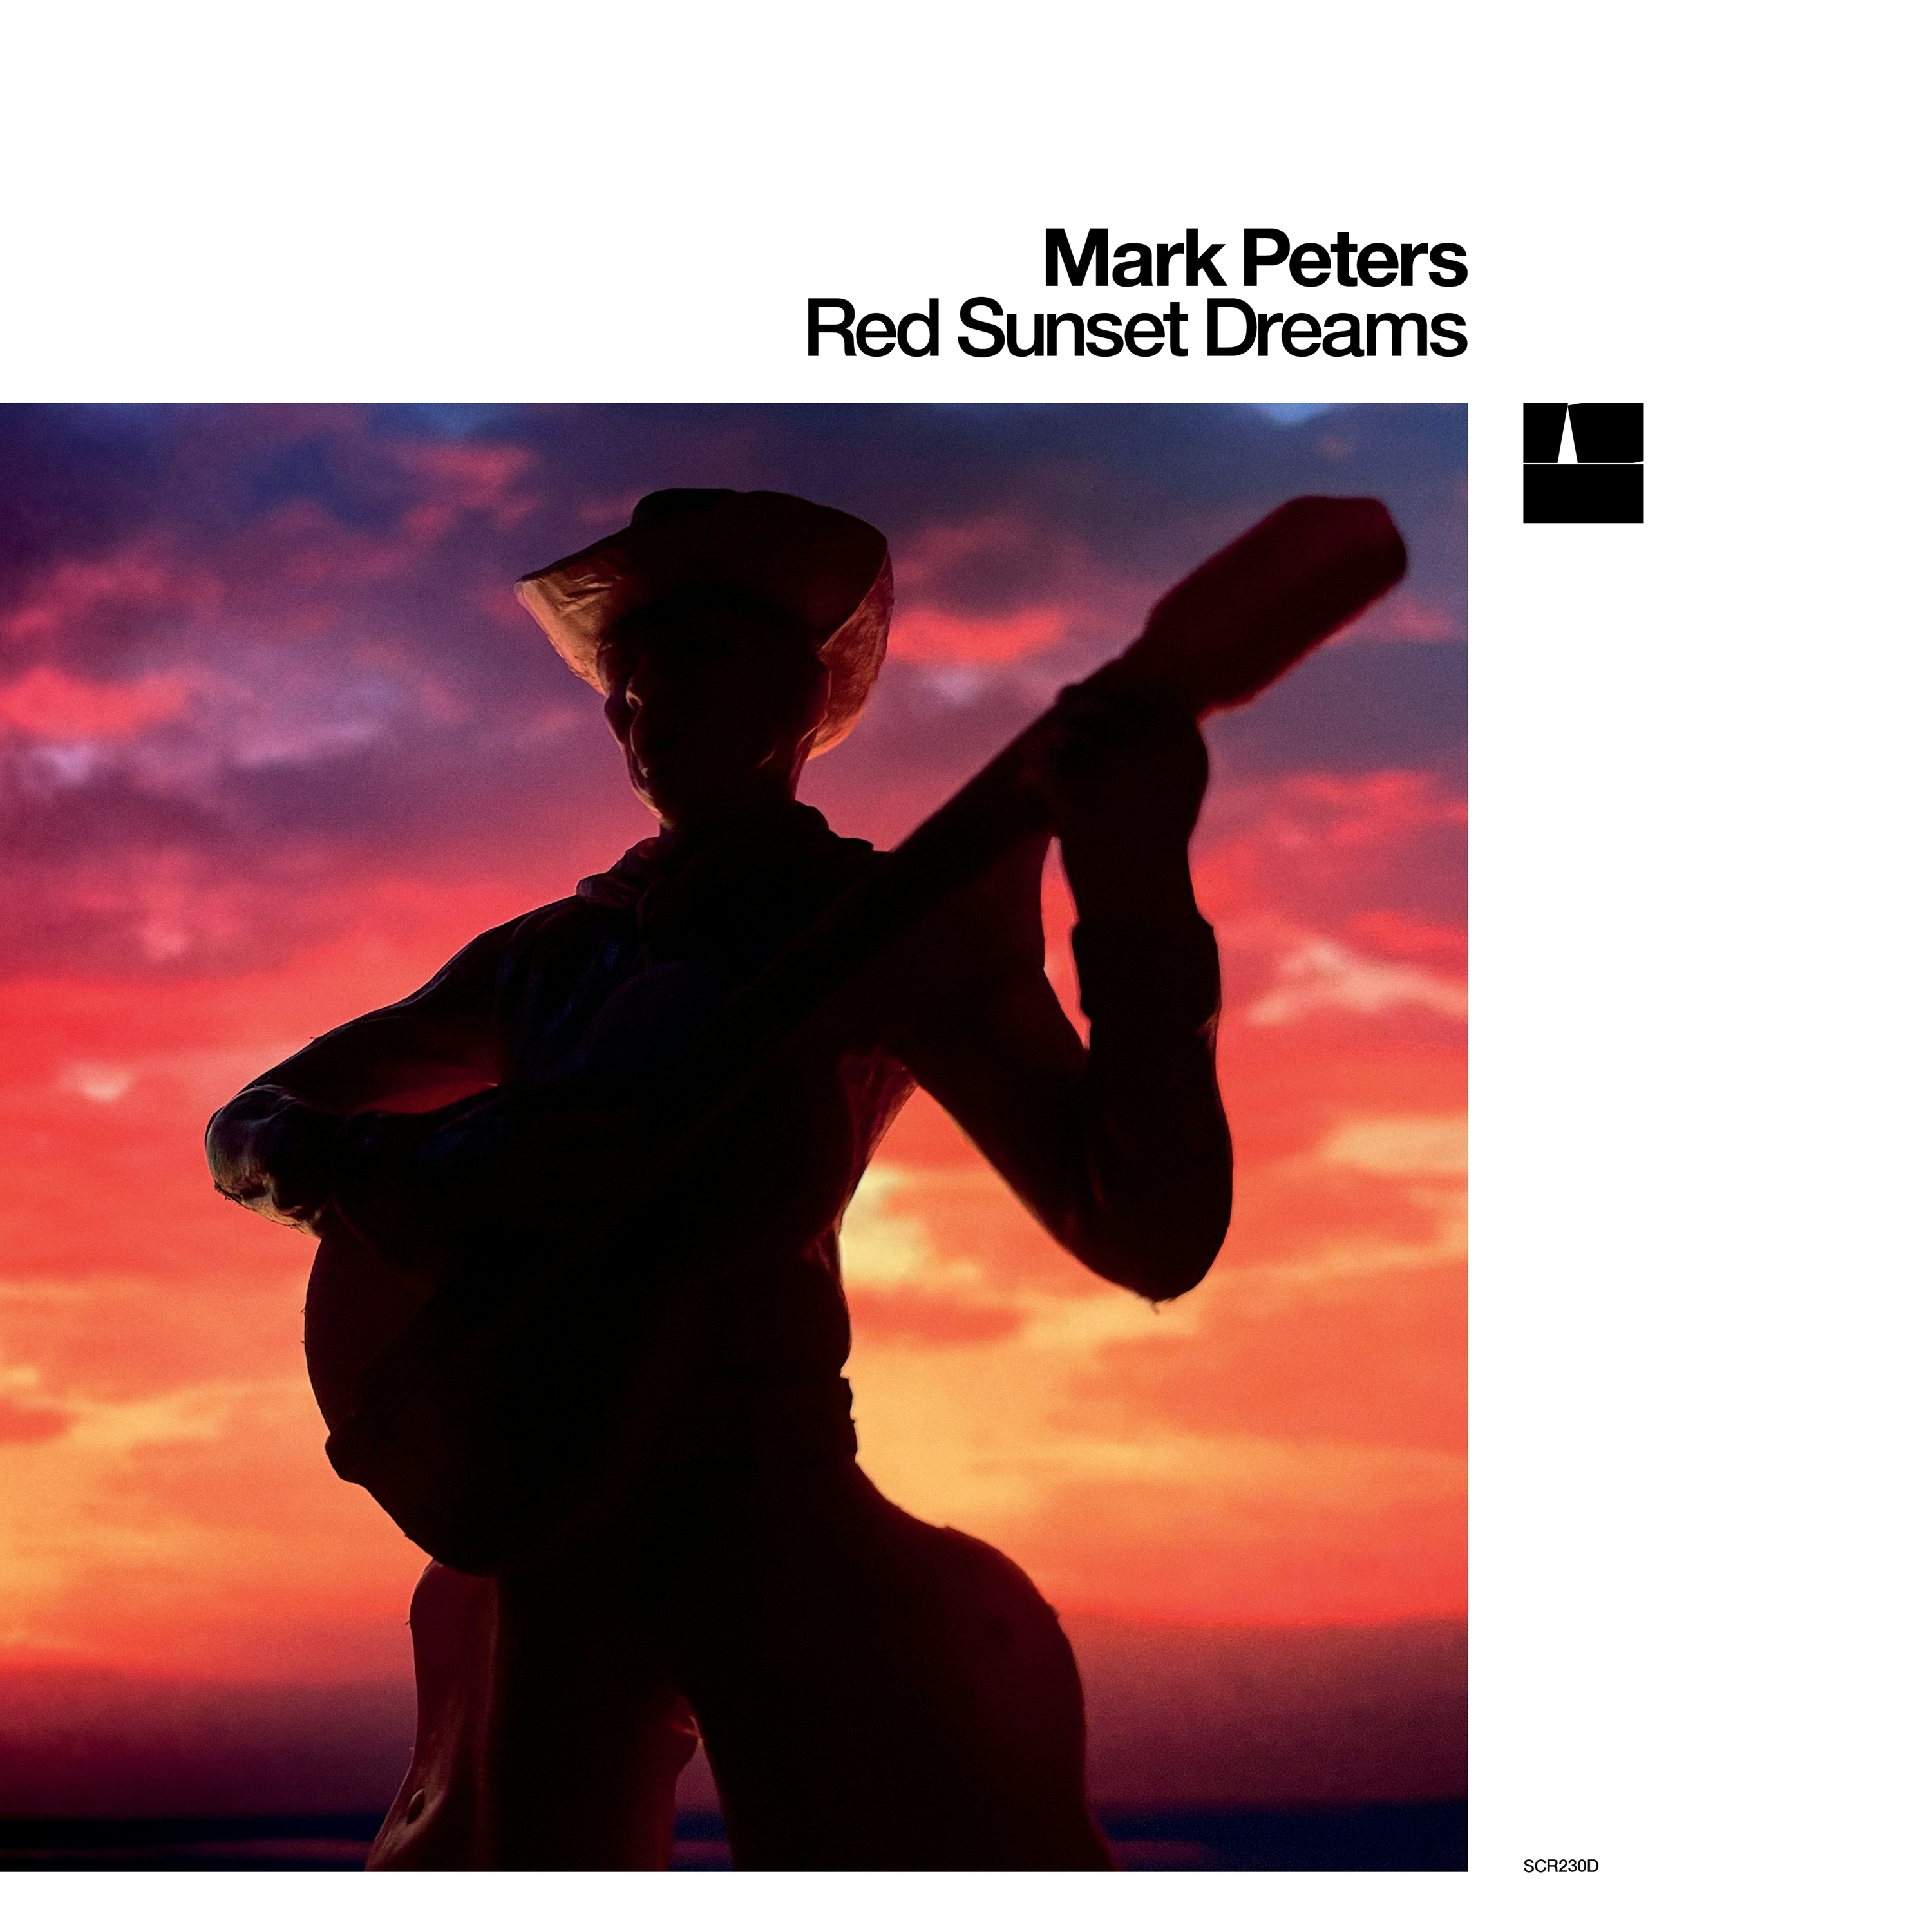 Album artwork for Red Sunset Dreams by Mark Peters